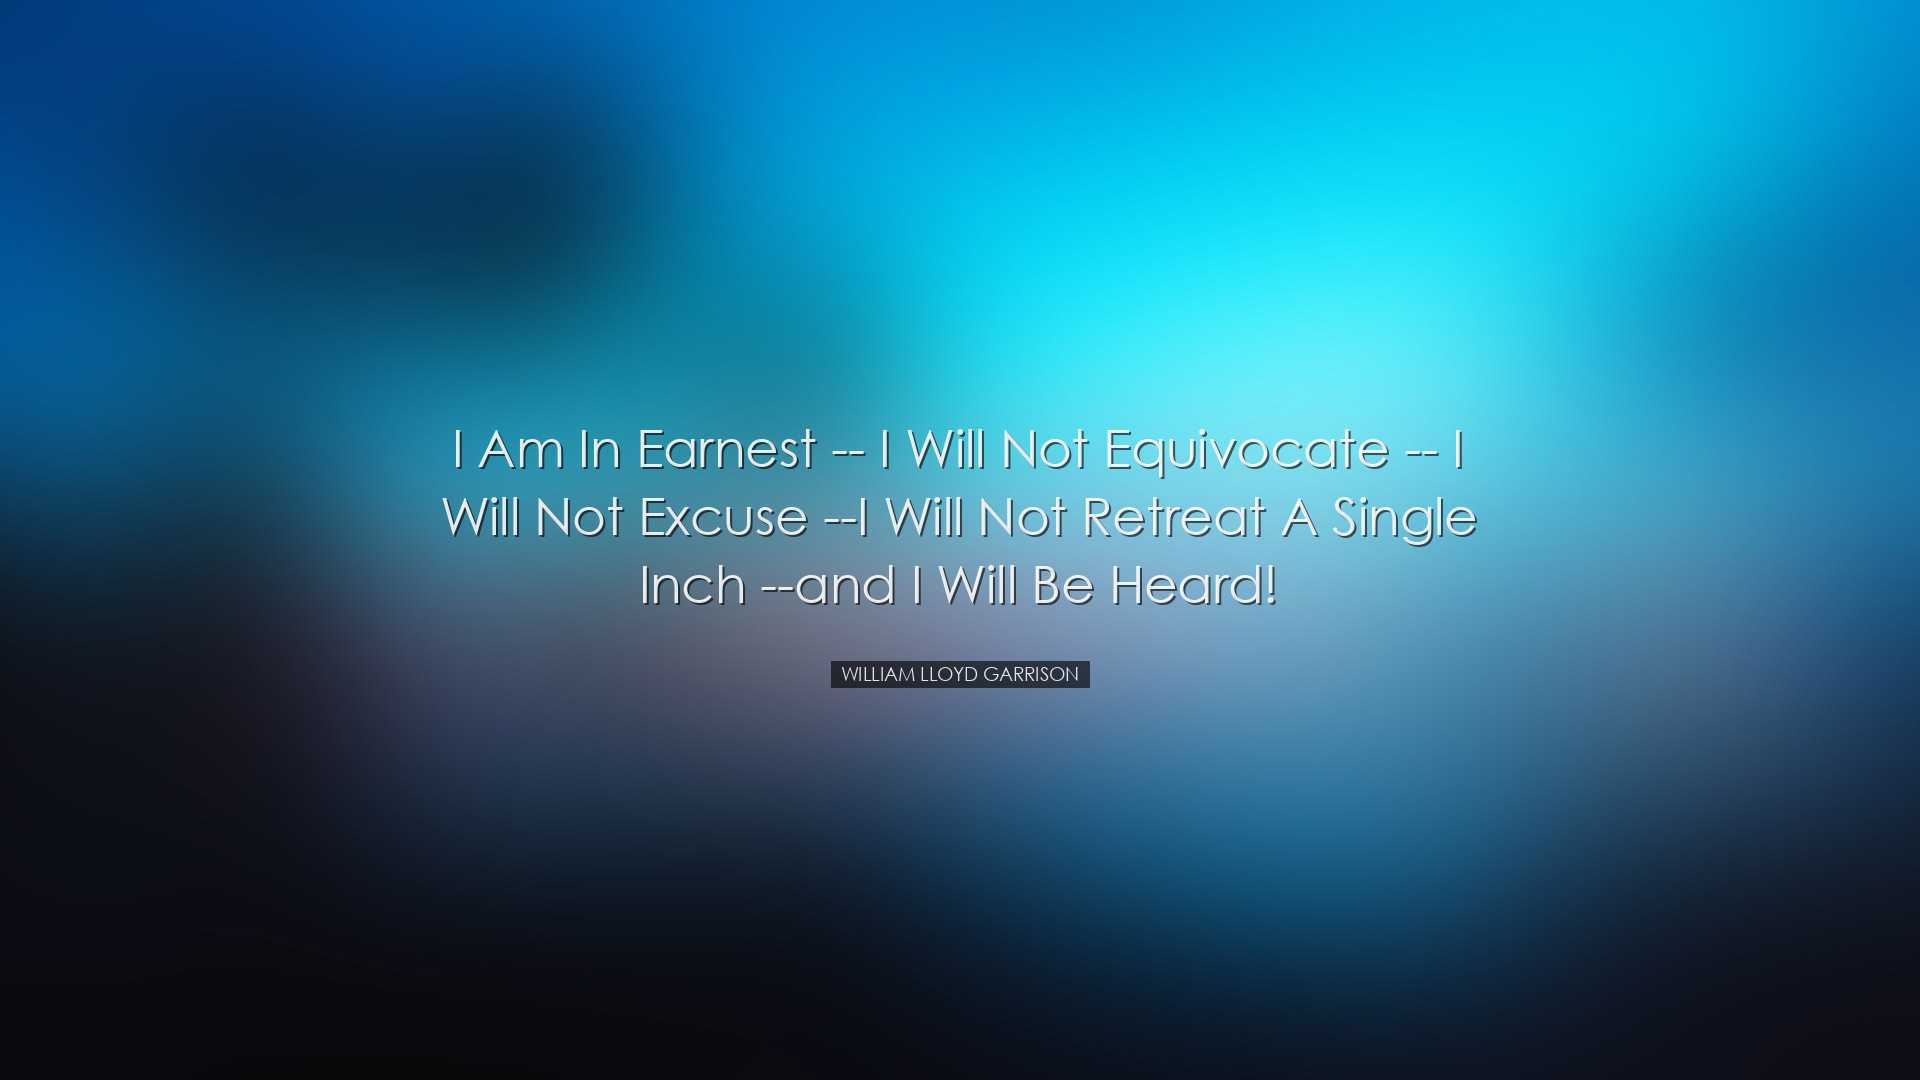 I am in earnest -- I will not equivocate -- I will not excuse --I